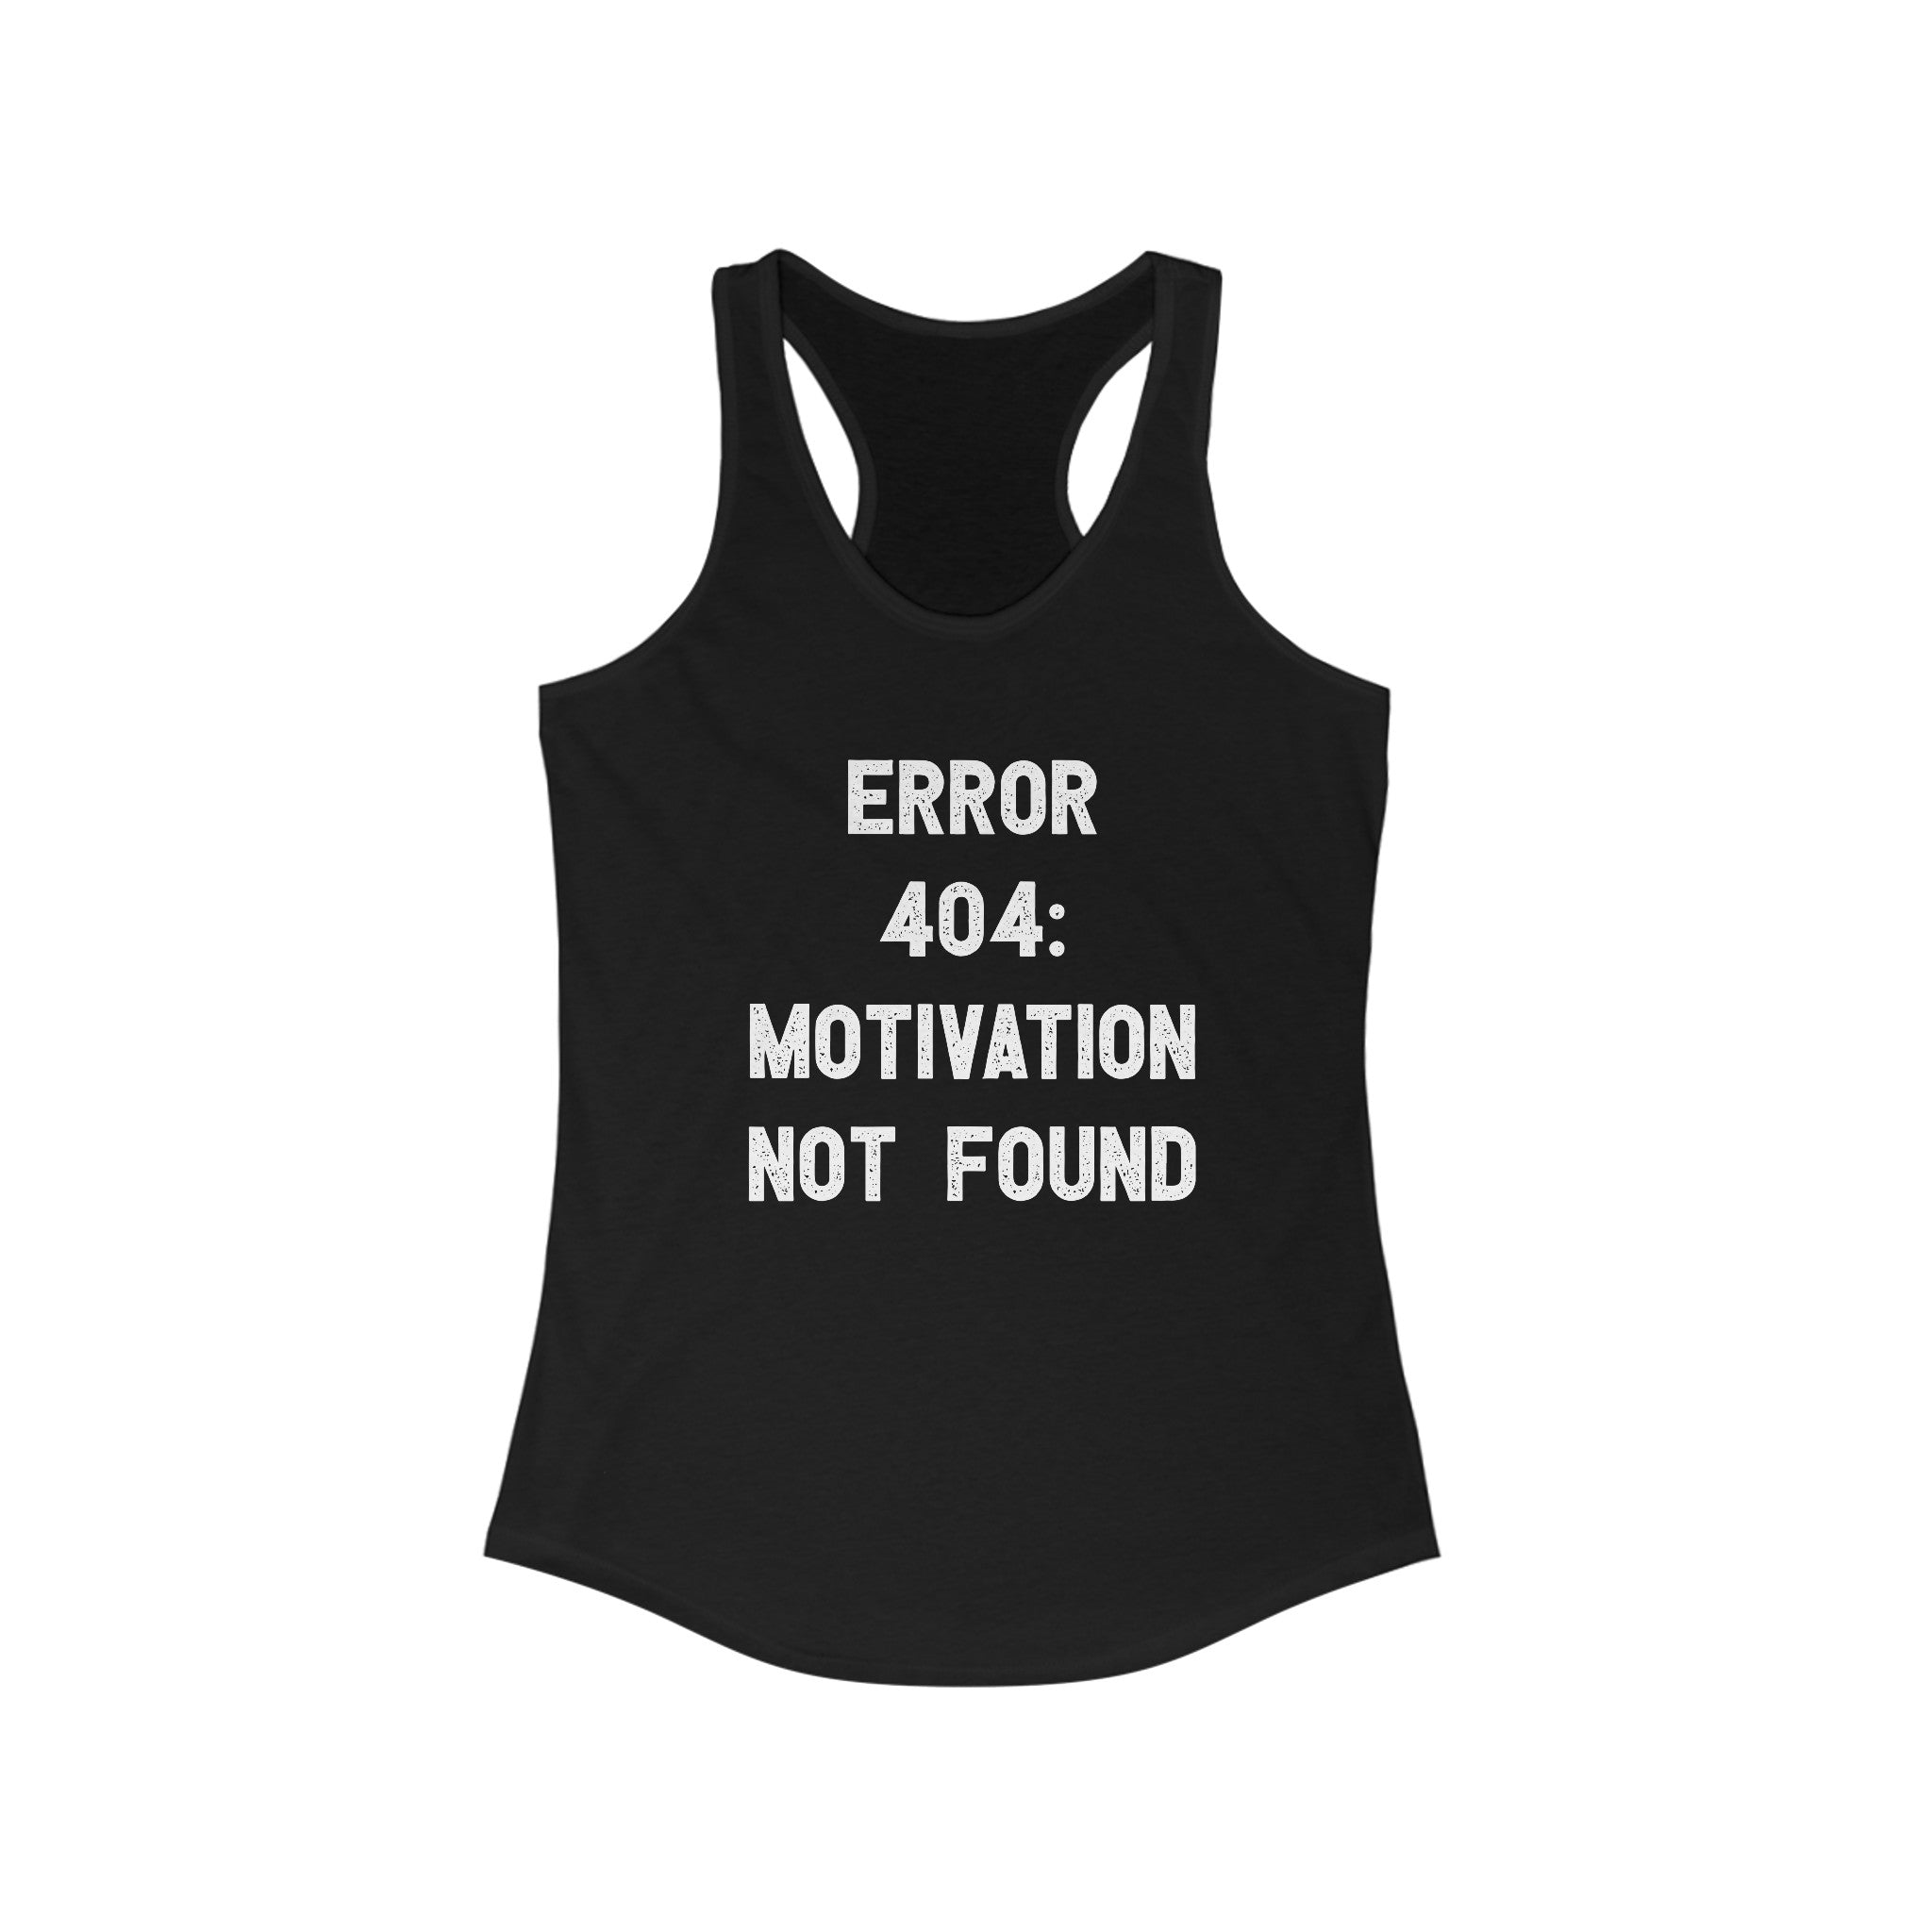 Error 404: Motivation not found - Women's Racerback Tank with the text "ERROR 404: MOTIVATION NOT FOUND" printed in white uppercase letters on the front. The lightweight fabric ensures all-day comfort.